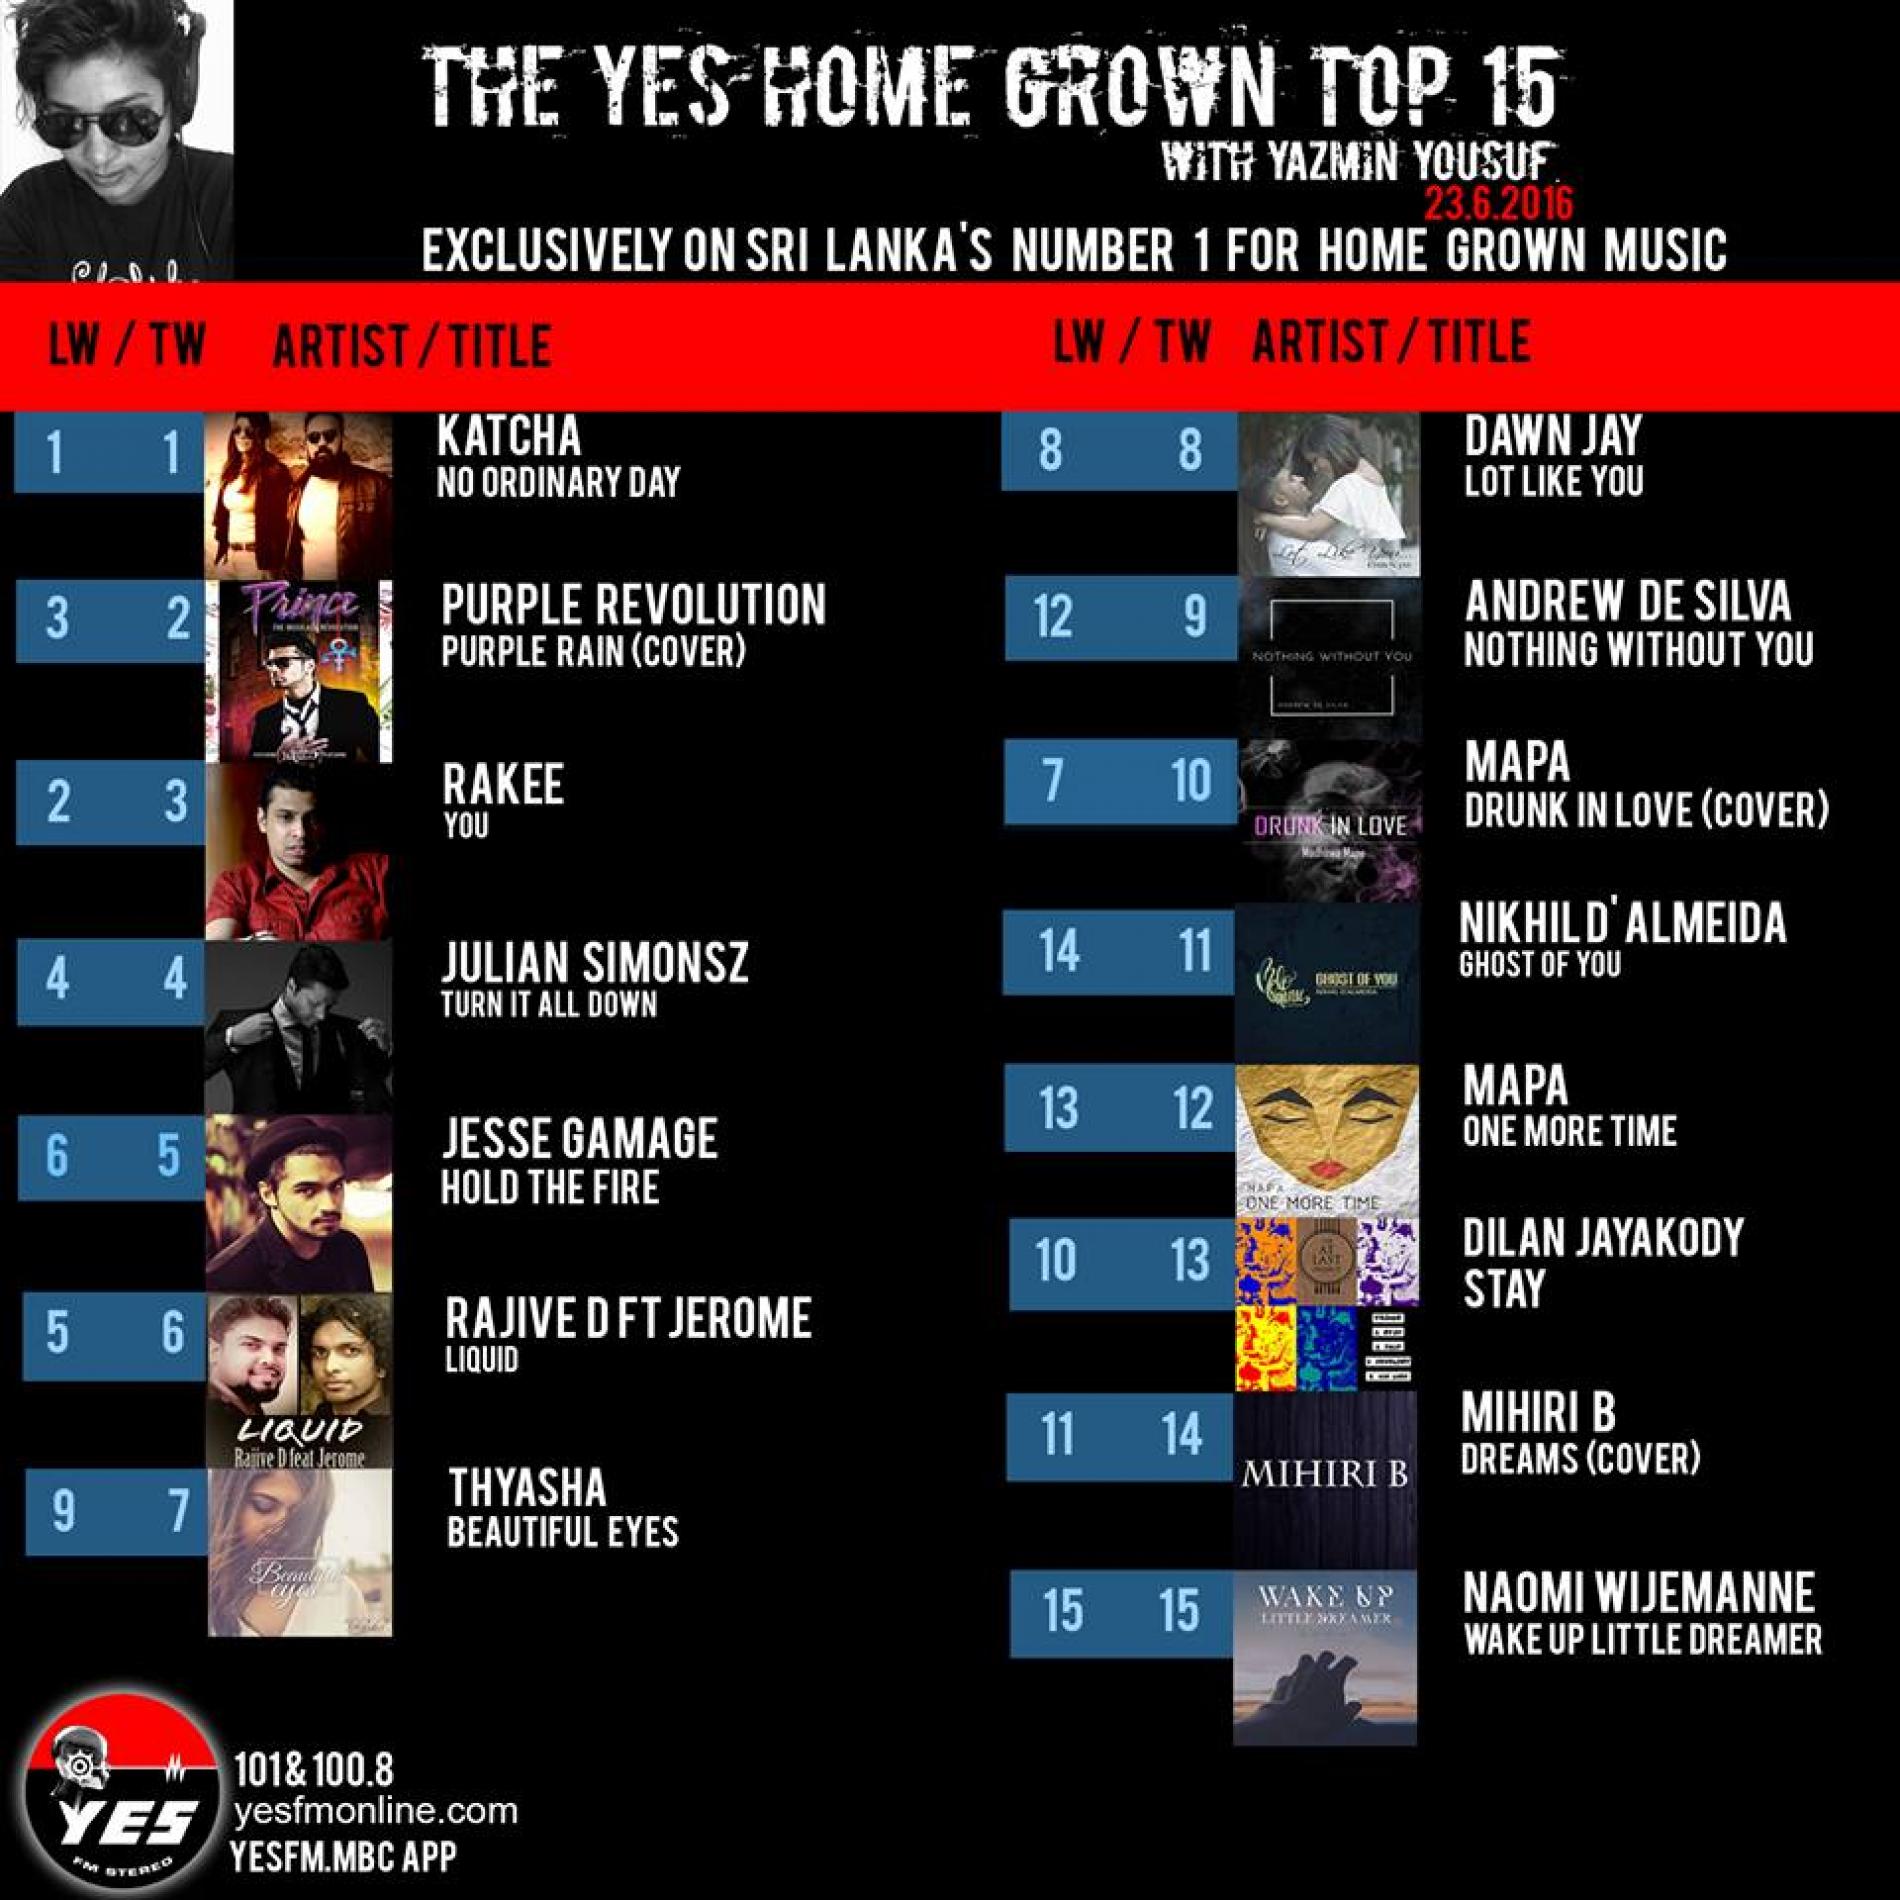 Its Week 3 For Katcha On Top The YES Home Grown Top 15